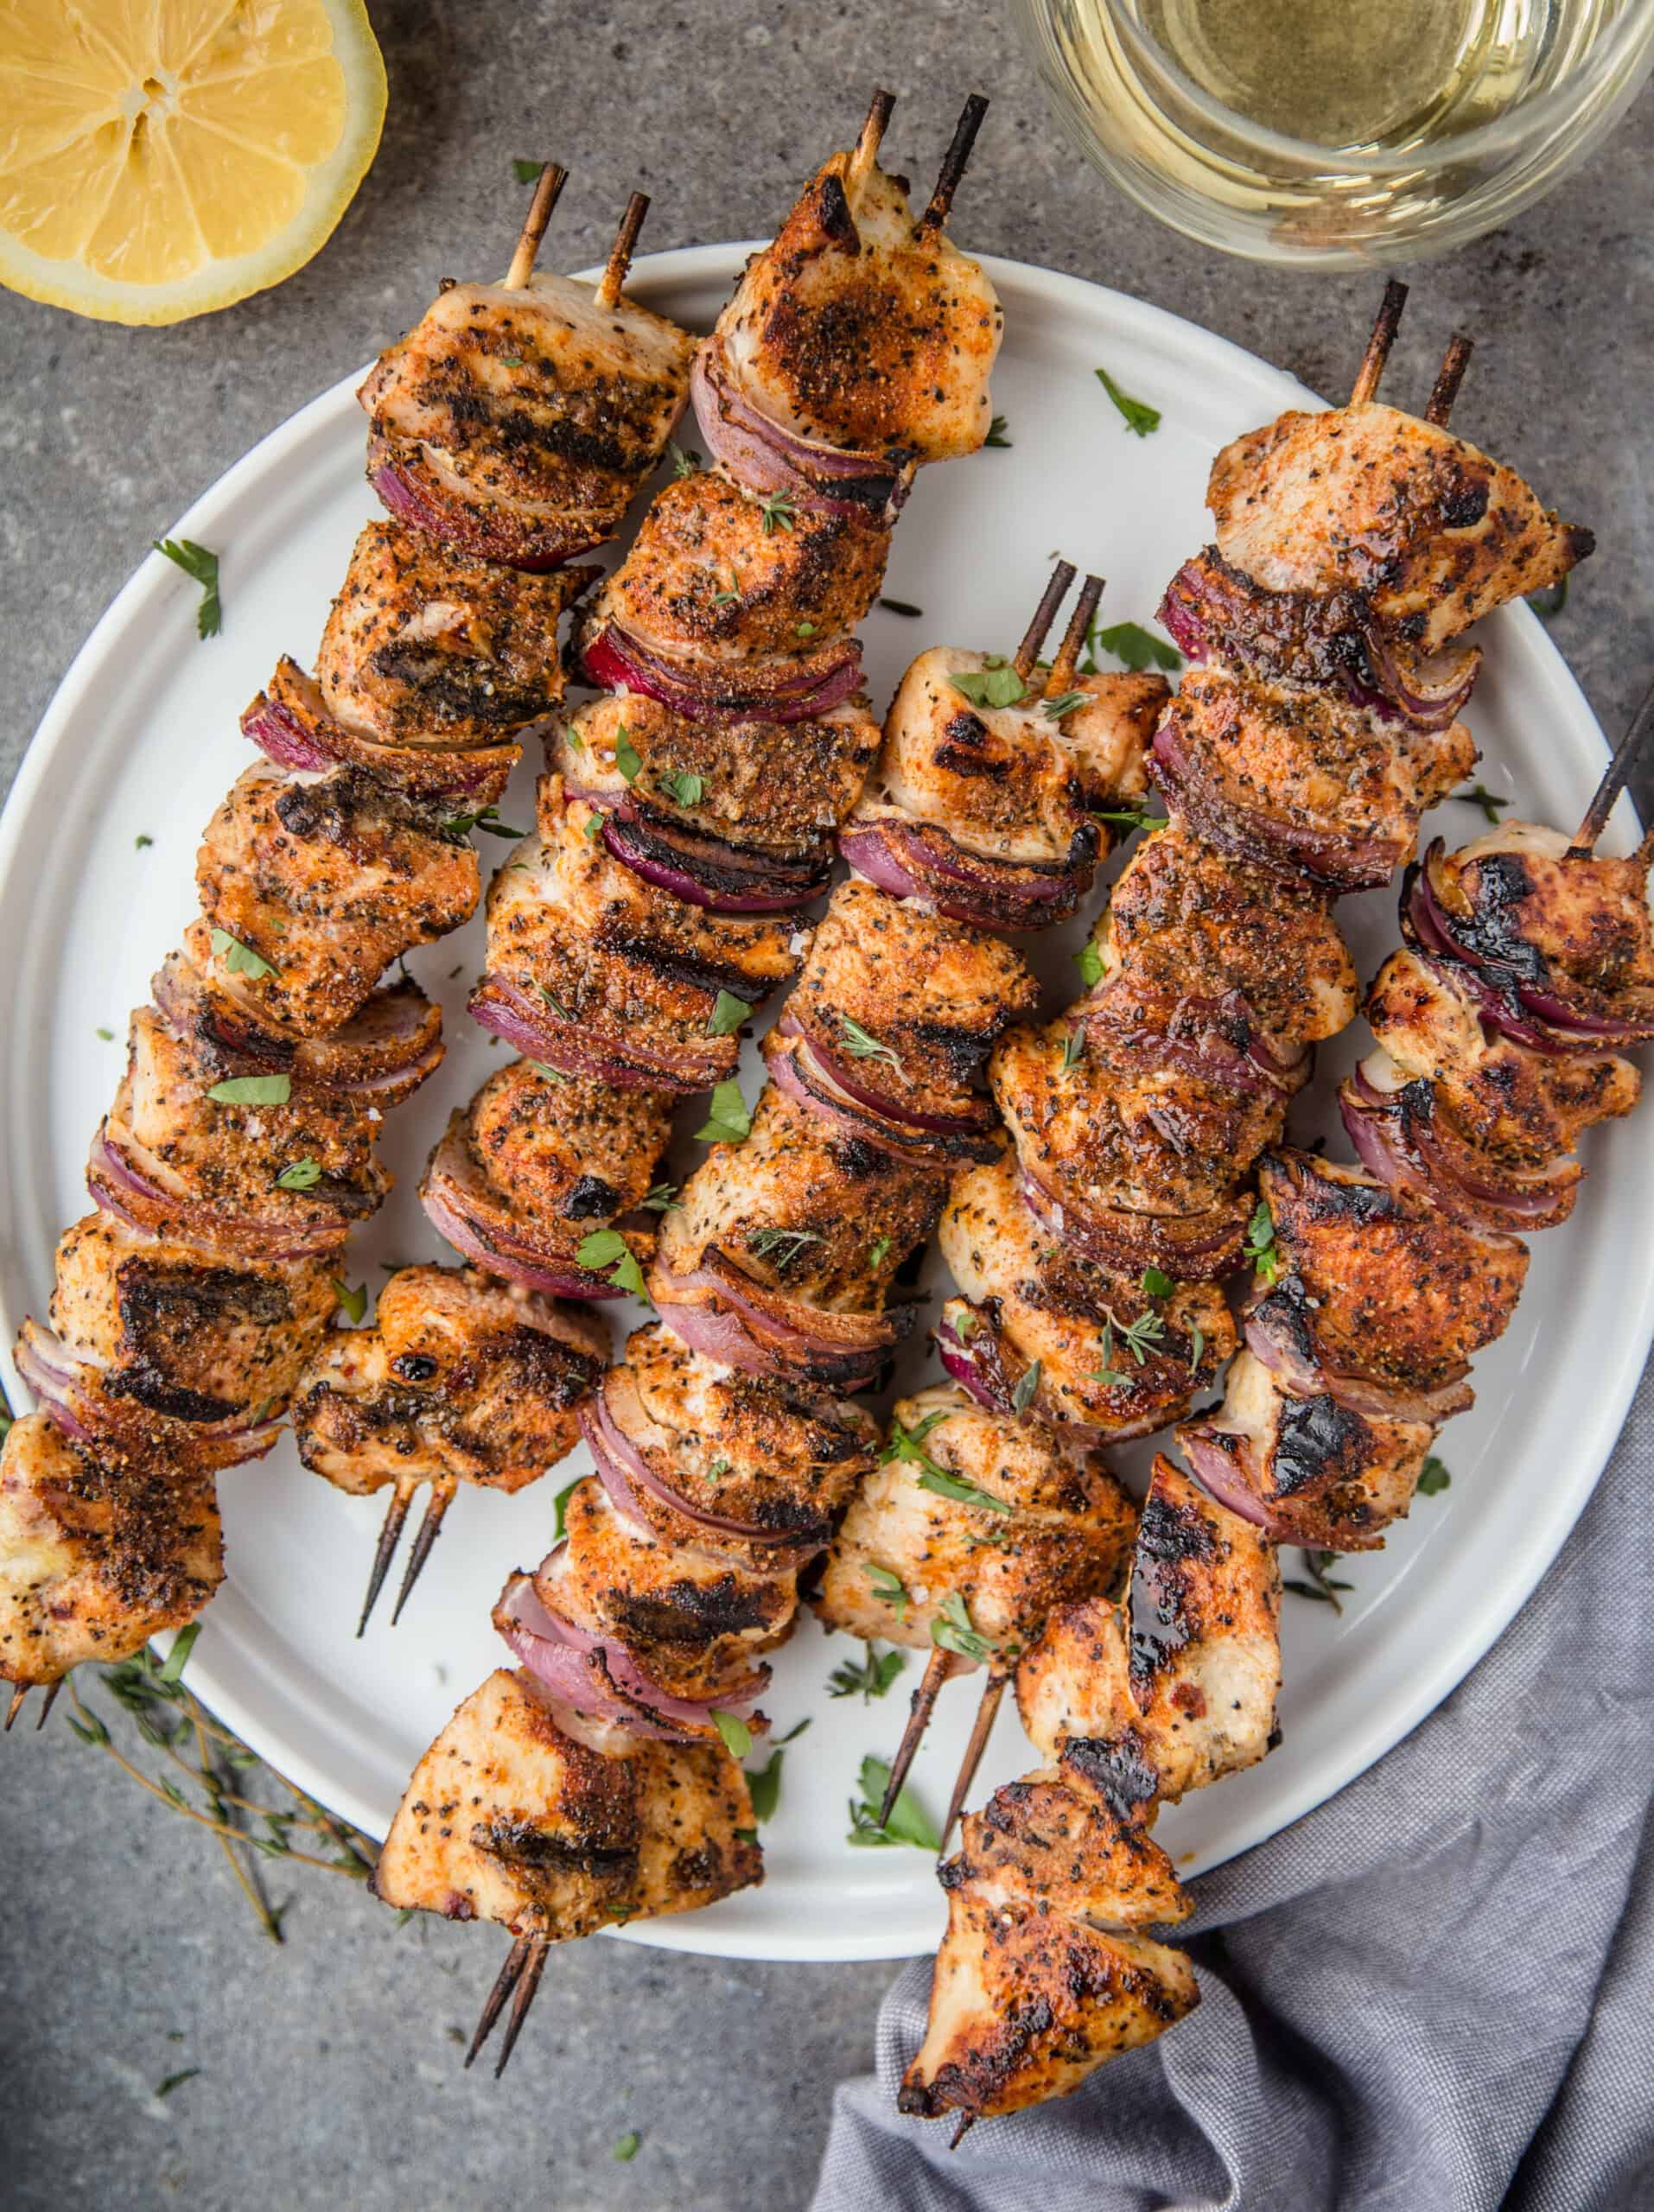 How to Prepare Perfect Grilled Chicken Skewers - Find Healthy Recipes